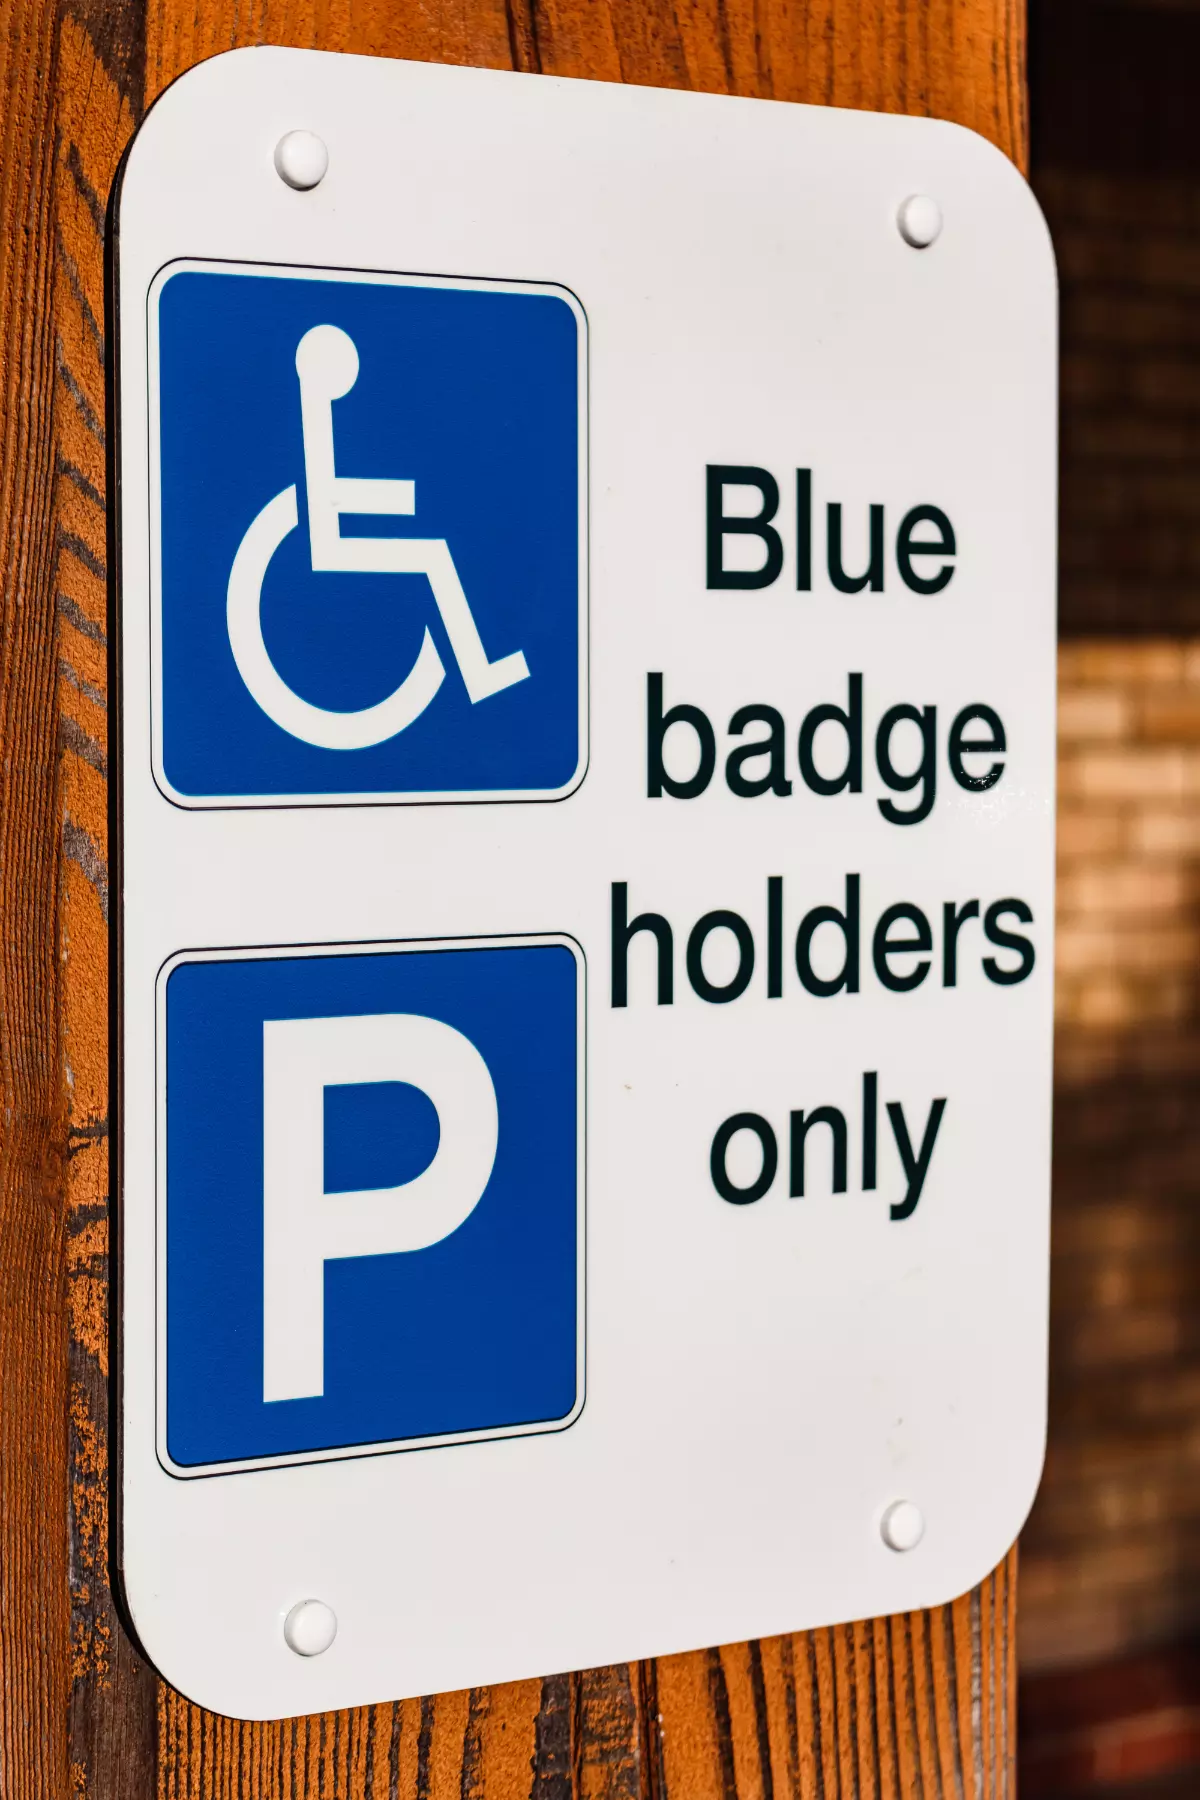 What Is The Best Car For A Disabled Person?